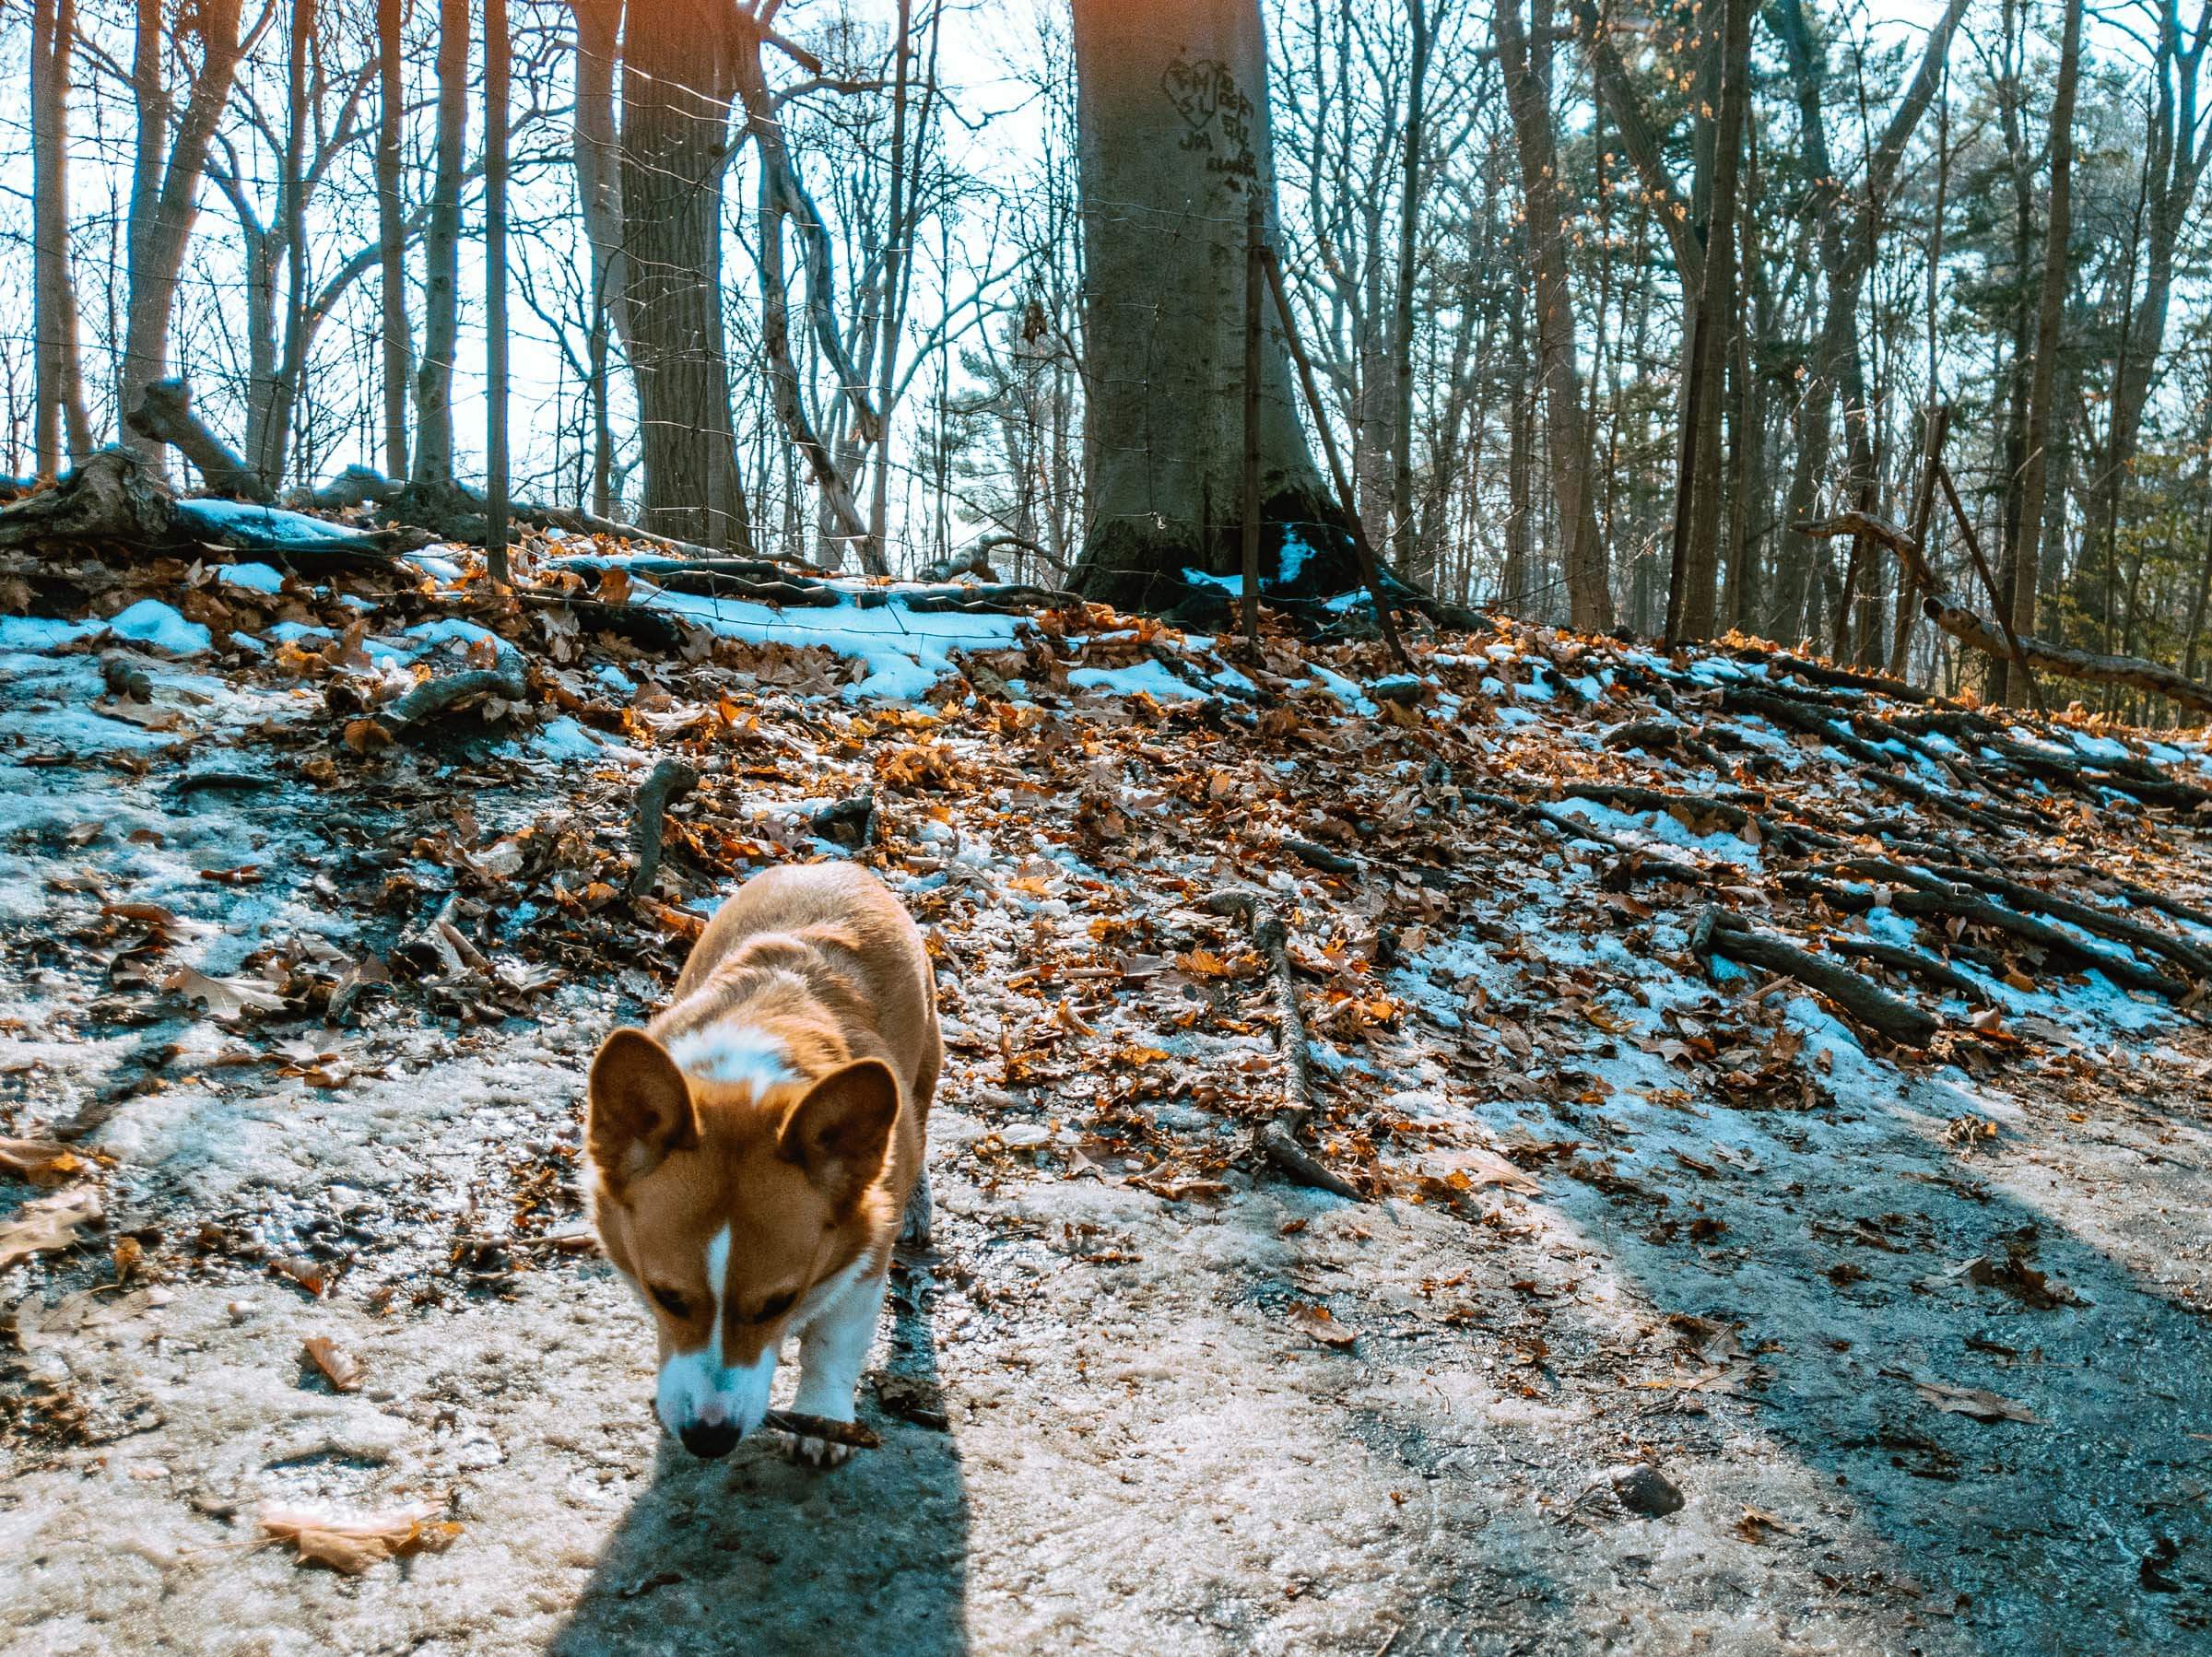 Image of a corgi picking up a small stick on a early winter / late fall off-leash muddy trail at Sherwood Park. Limone, the corgi is facing towards the camera. In the background is a thin wire fence that marks the boundary between the off-leash trail and the environmentally sensitive area of the park.